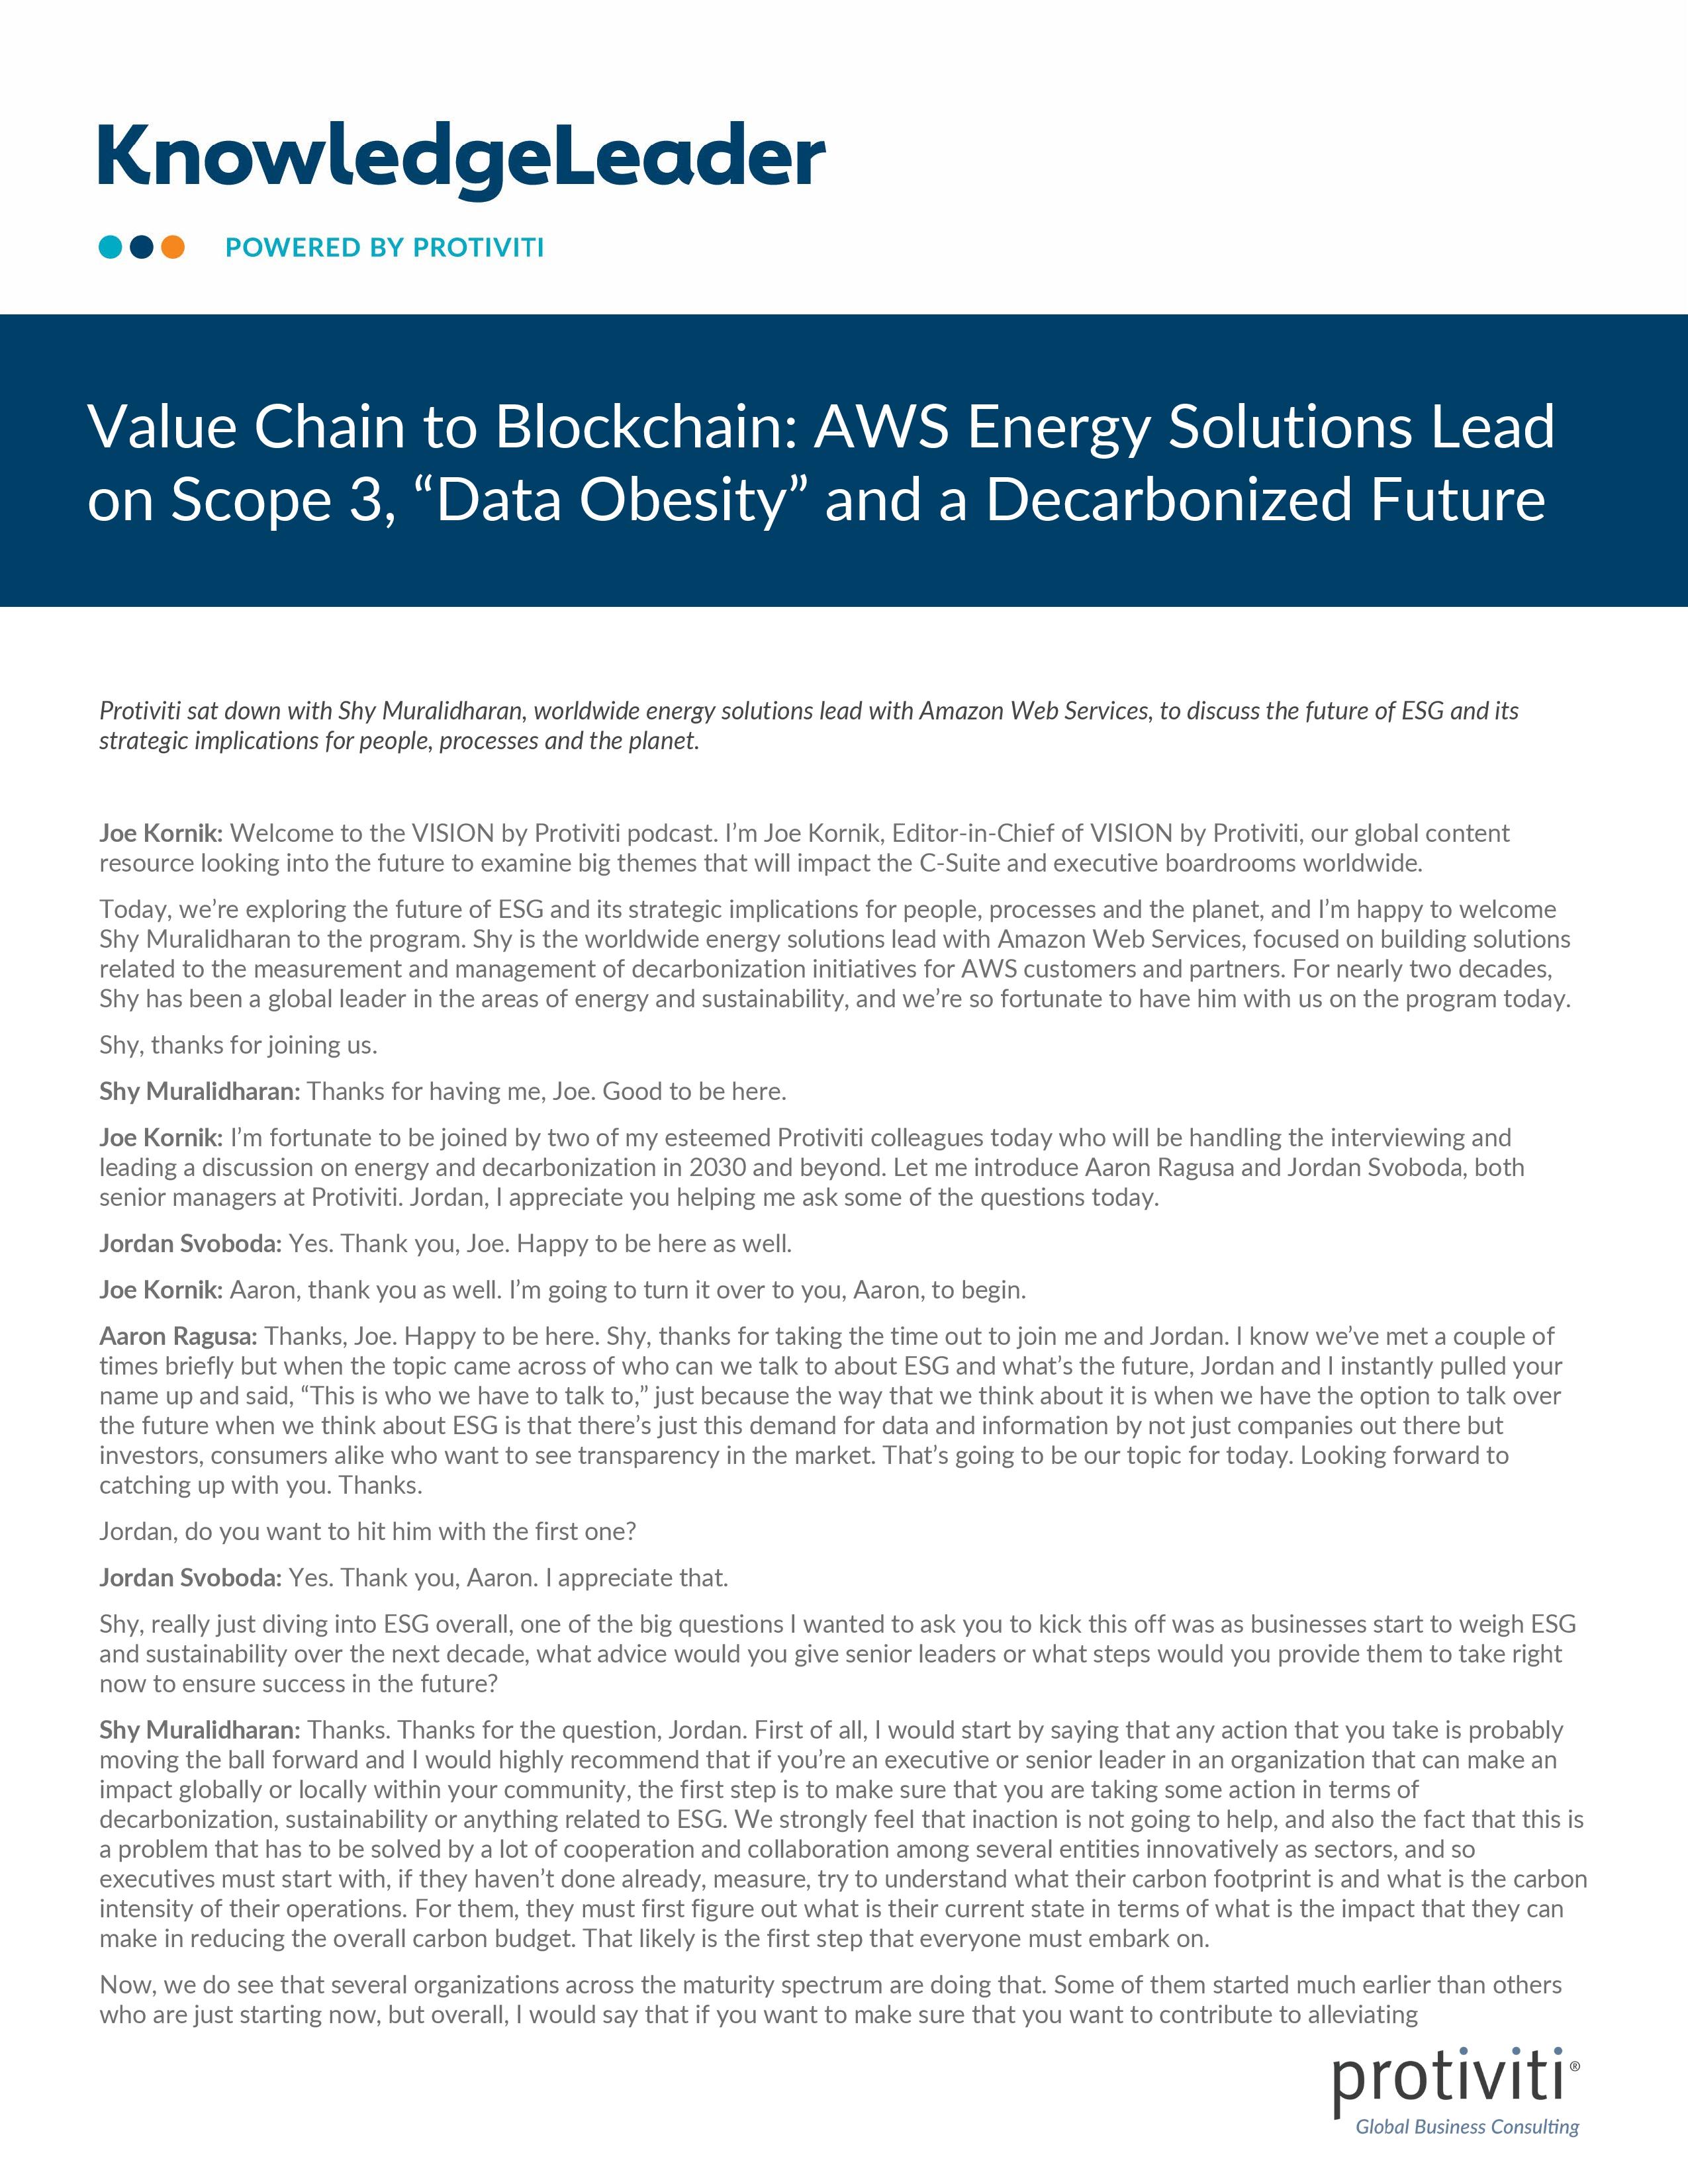 screenshot of the first page of Value Chain to Blockchain AWS Energy Solutions Lead on Scope 3, “Data Obesity” and a Decarbonized Future